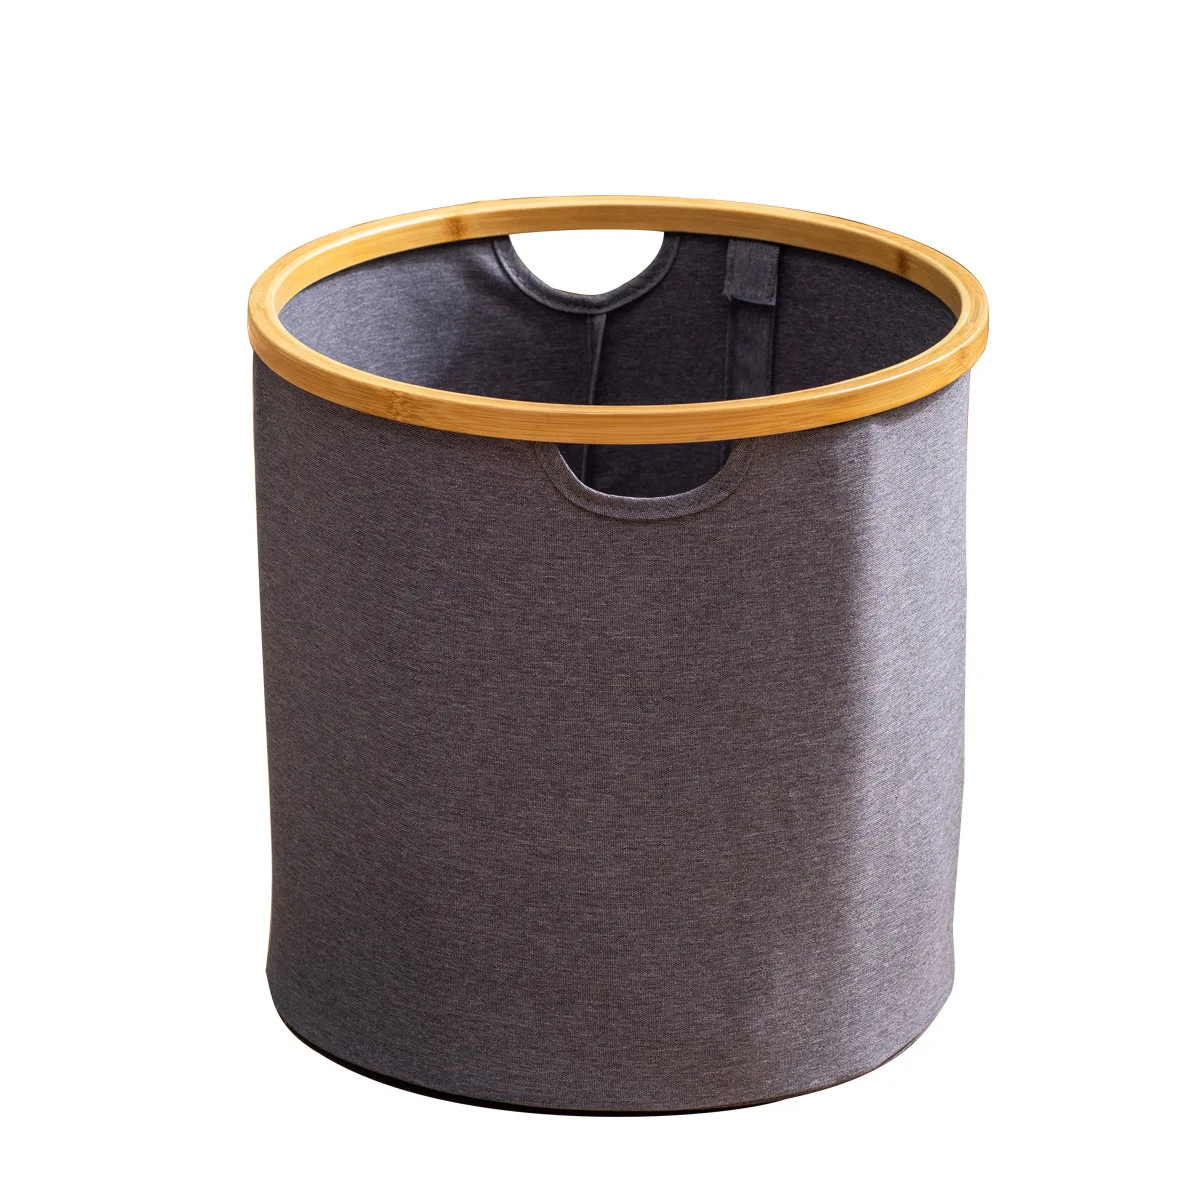 

Amazon Hot Sale Round Collapsible Oxford Fabric Bamboo Frame Storage Box Space-efficient Cylindrical Laundry Basket